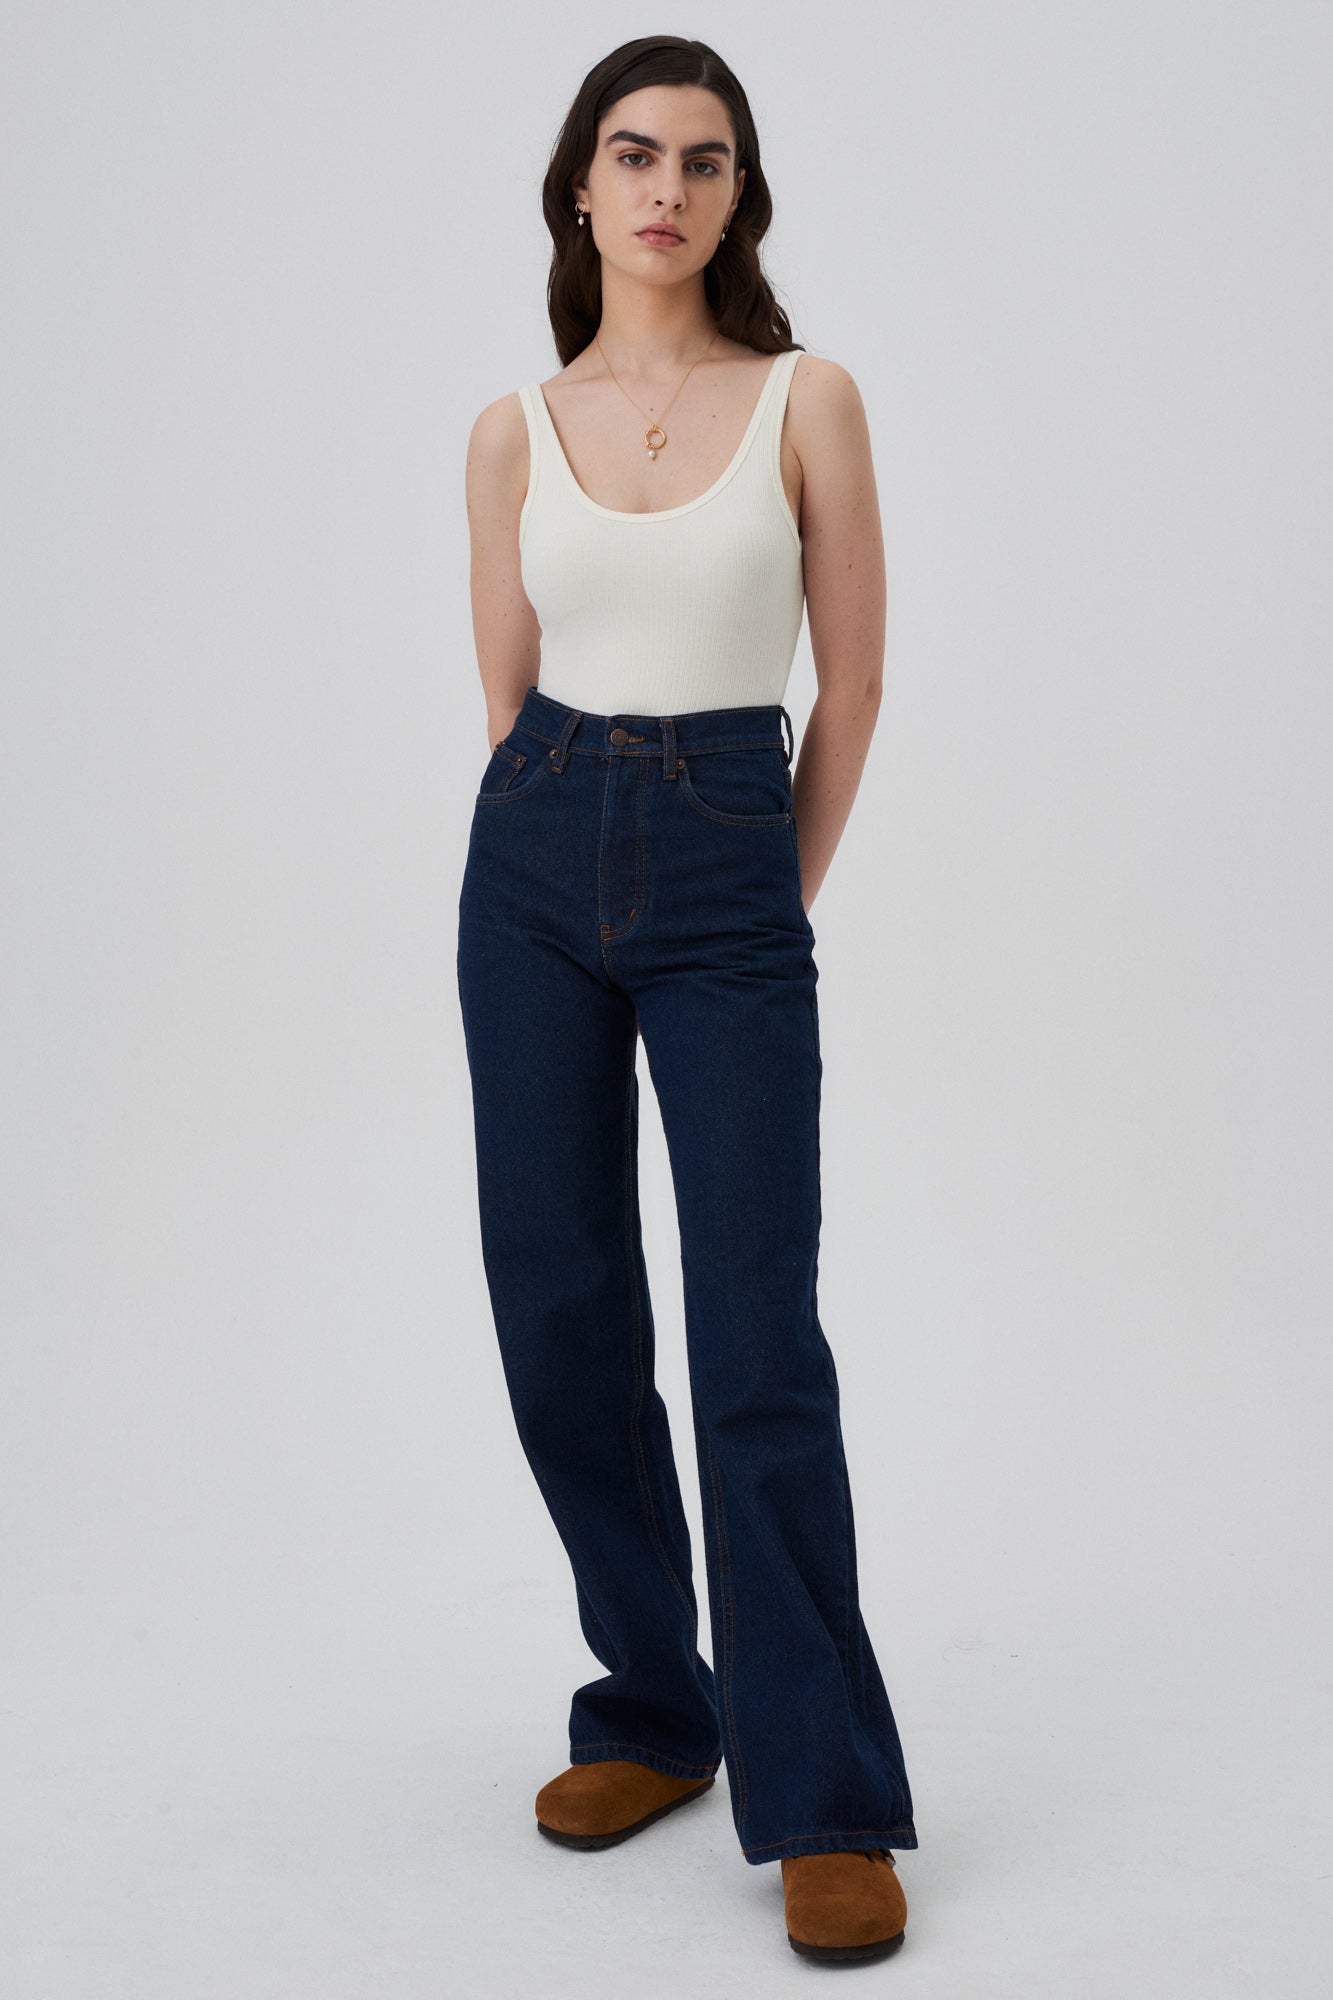 Bodysuit in organic cotton / 01 / 10 / cream white *straight-leg-jeans-from-recycled-cotton-05-13-dark-indigo* ?The model is 172cm tall and wears size XS? |